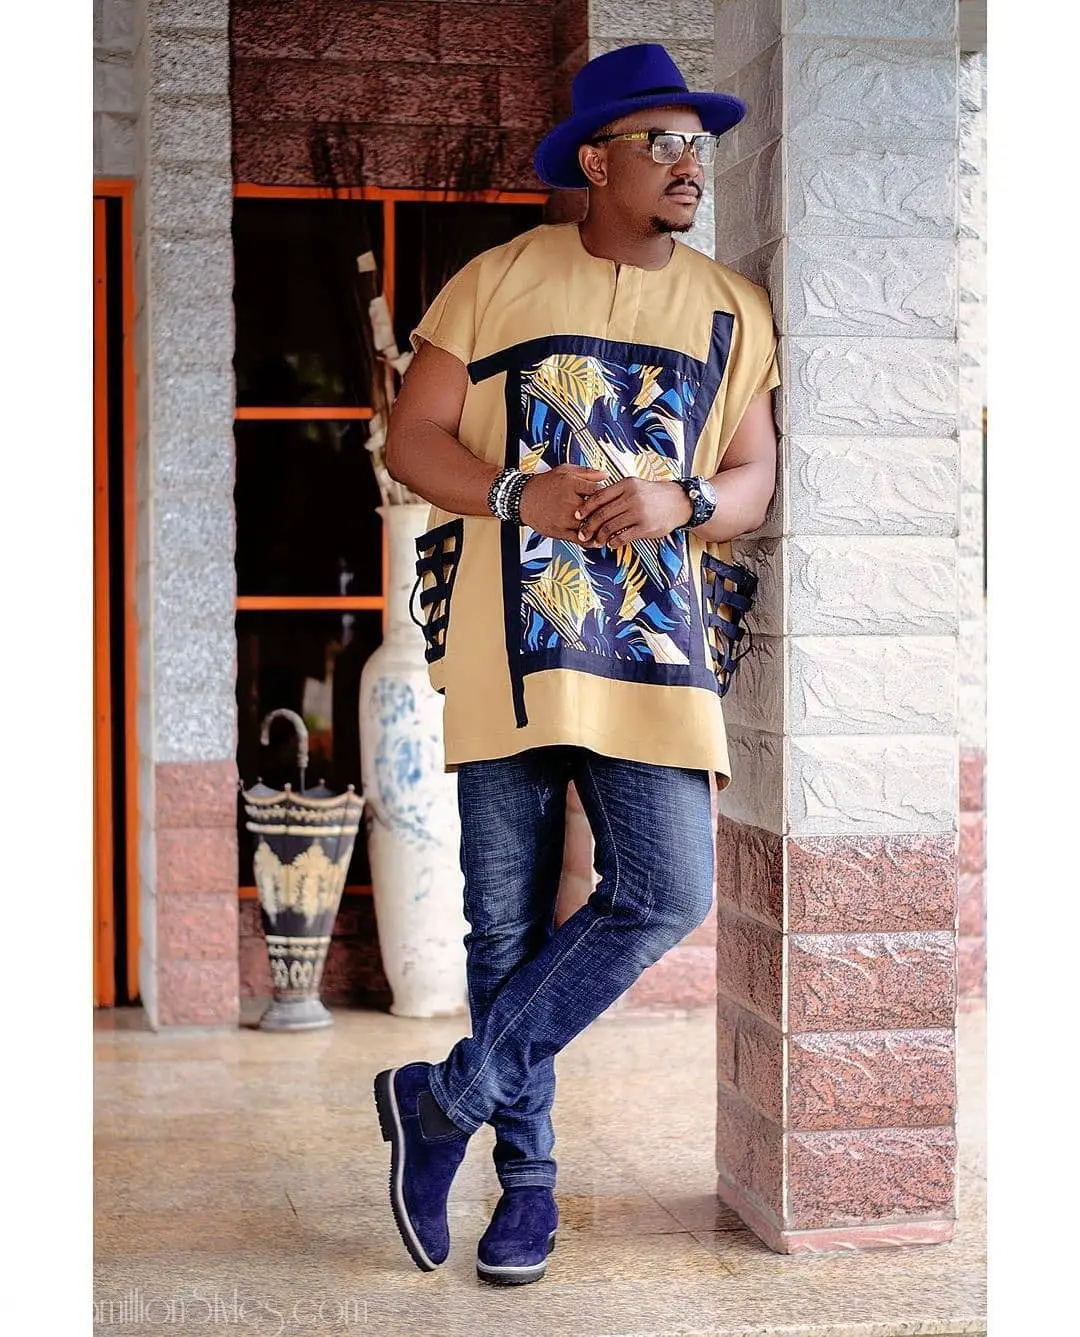 Rock These 8 Dashiki Styles With Swag